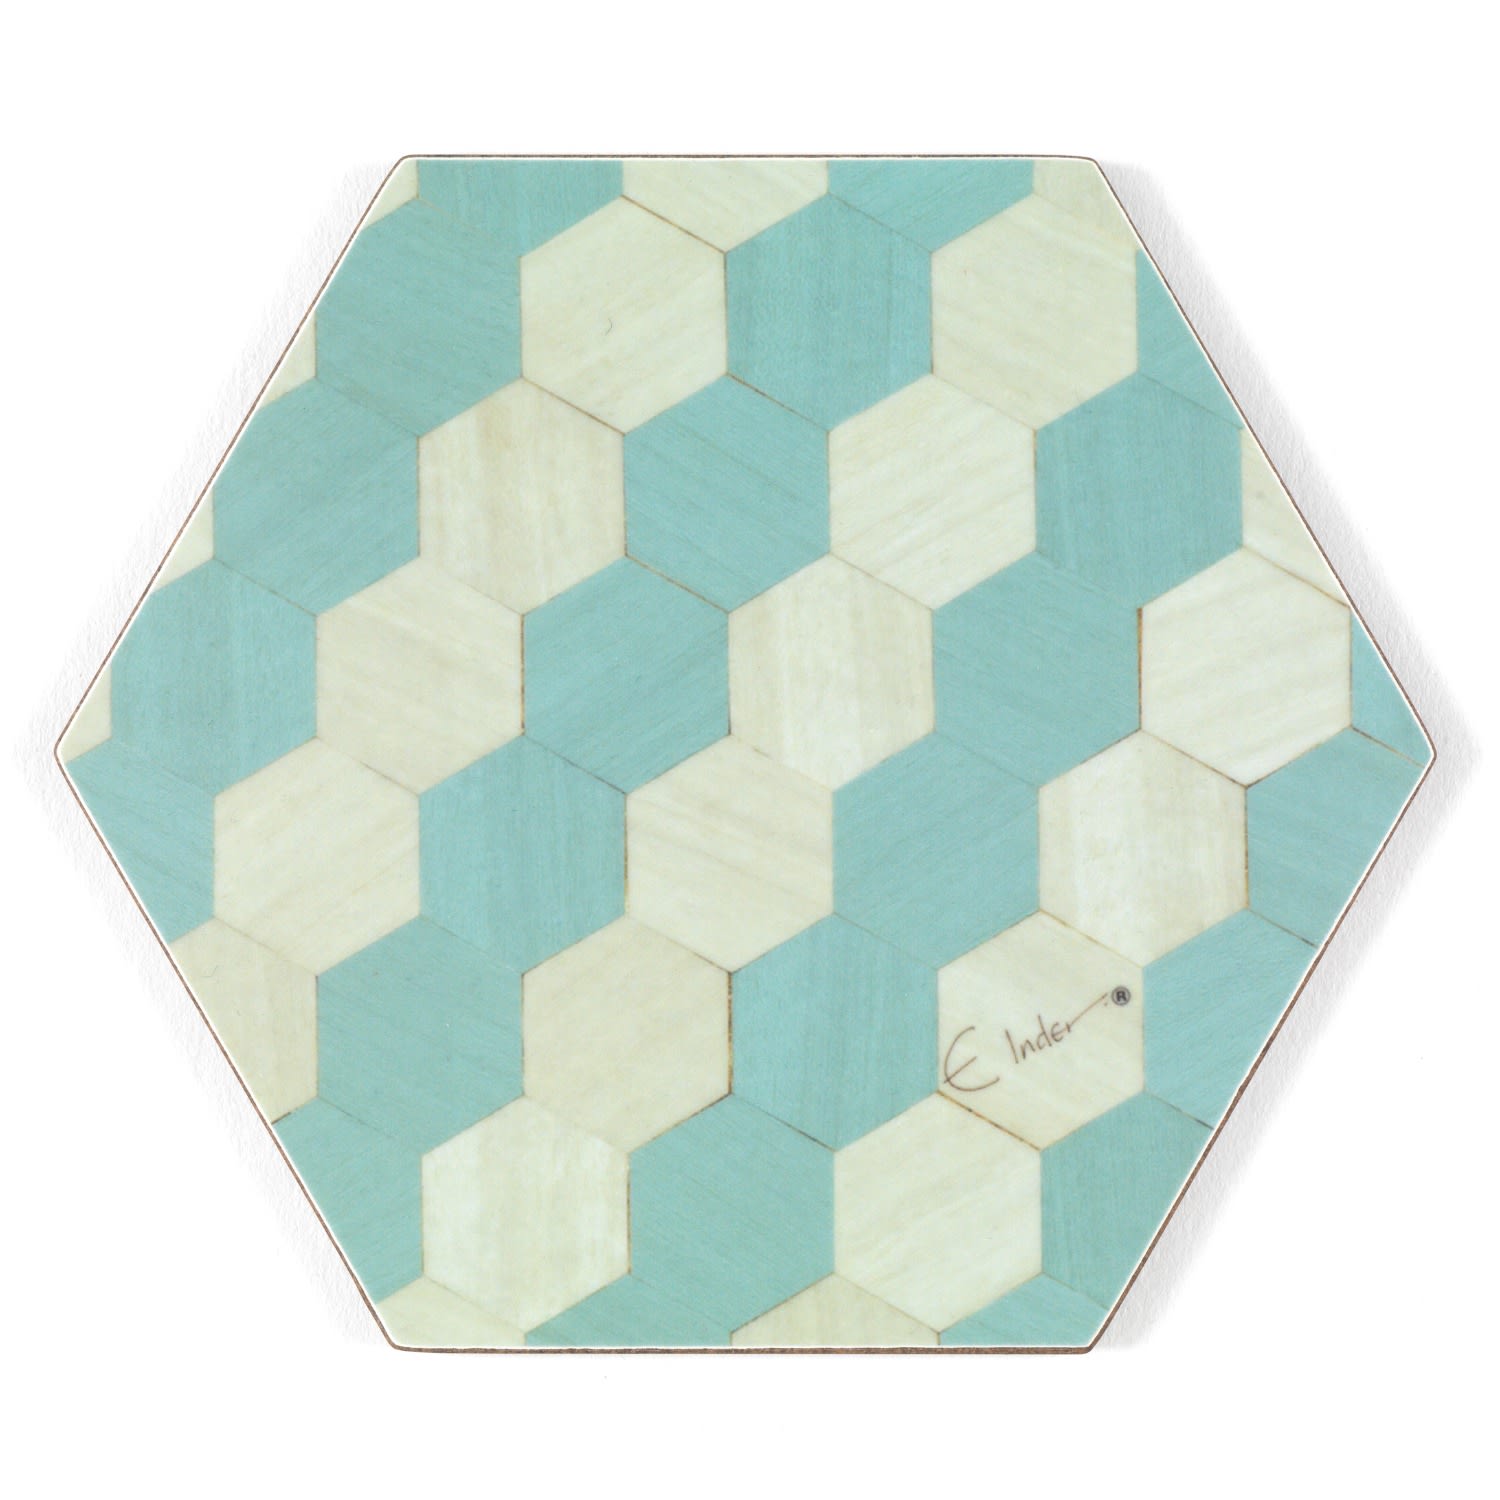 Blue Coaster Set Of Four. Hexagonal Scandi Design. Heat Proof Melamine. Tied With Ribbon For Gifting. E. Inder Designs